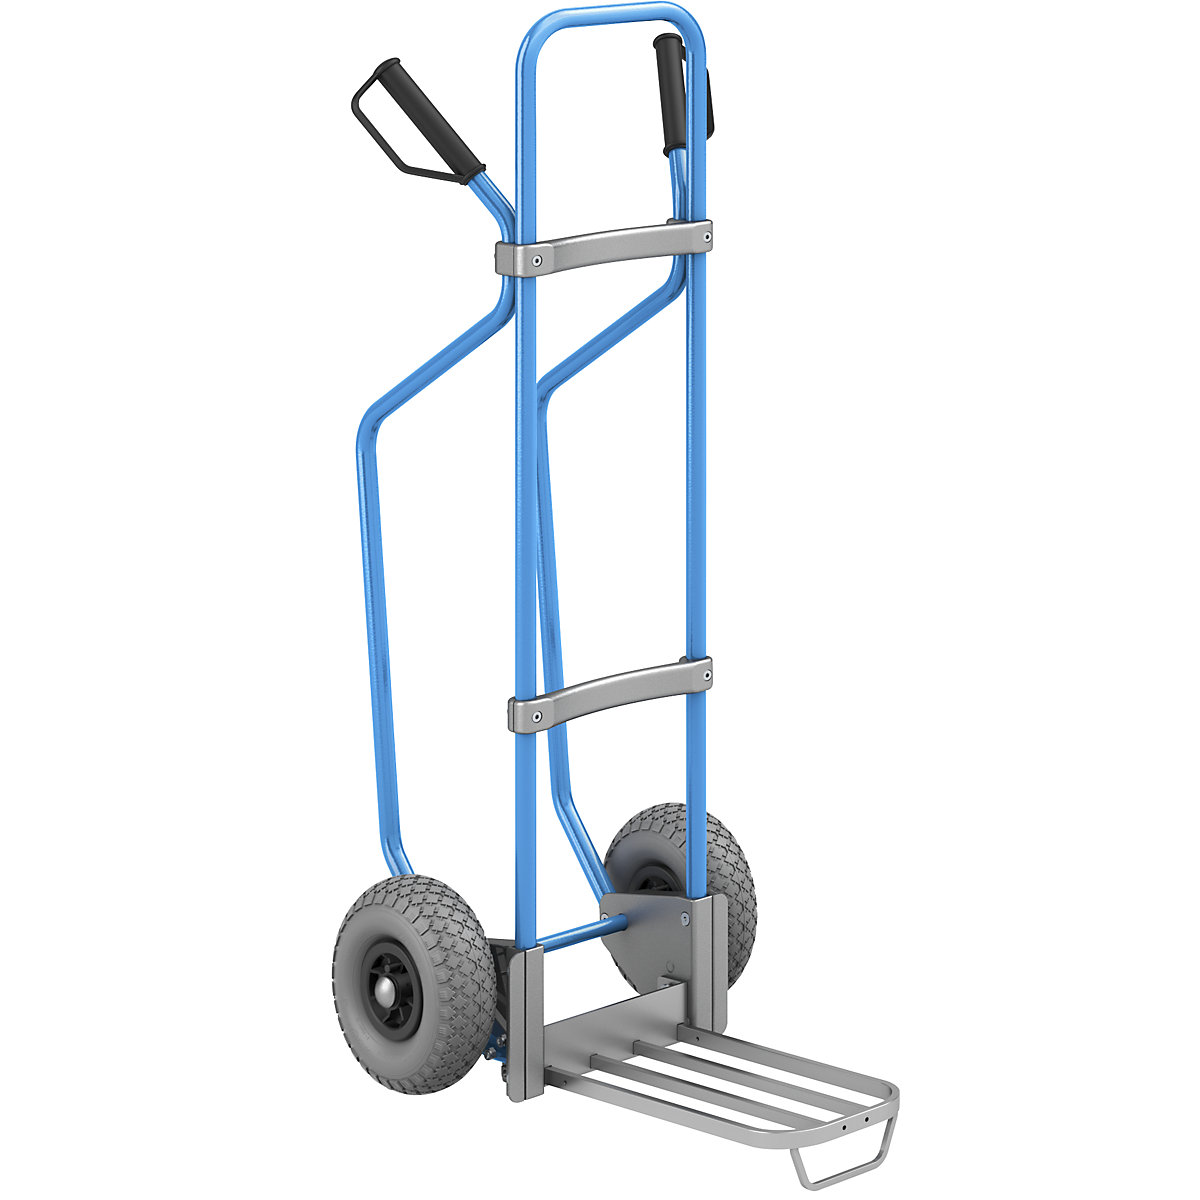 Sack truck with runners, blue – eurokraft pro, parcel footplate WxD 430 x 250 mm, aluminium, with handle, PU tyres, 5+ items-2